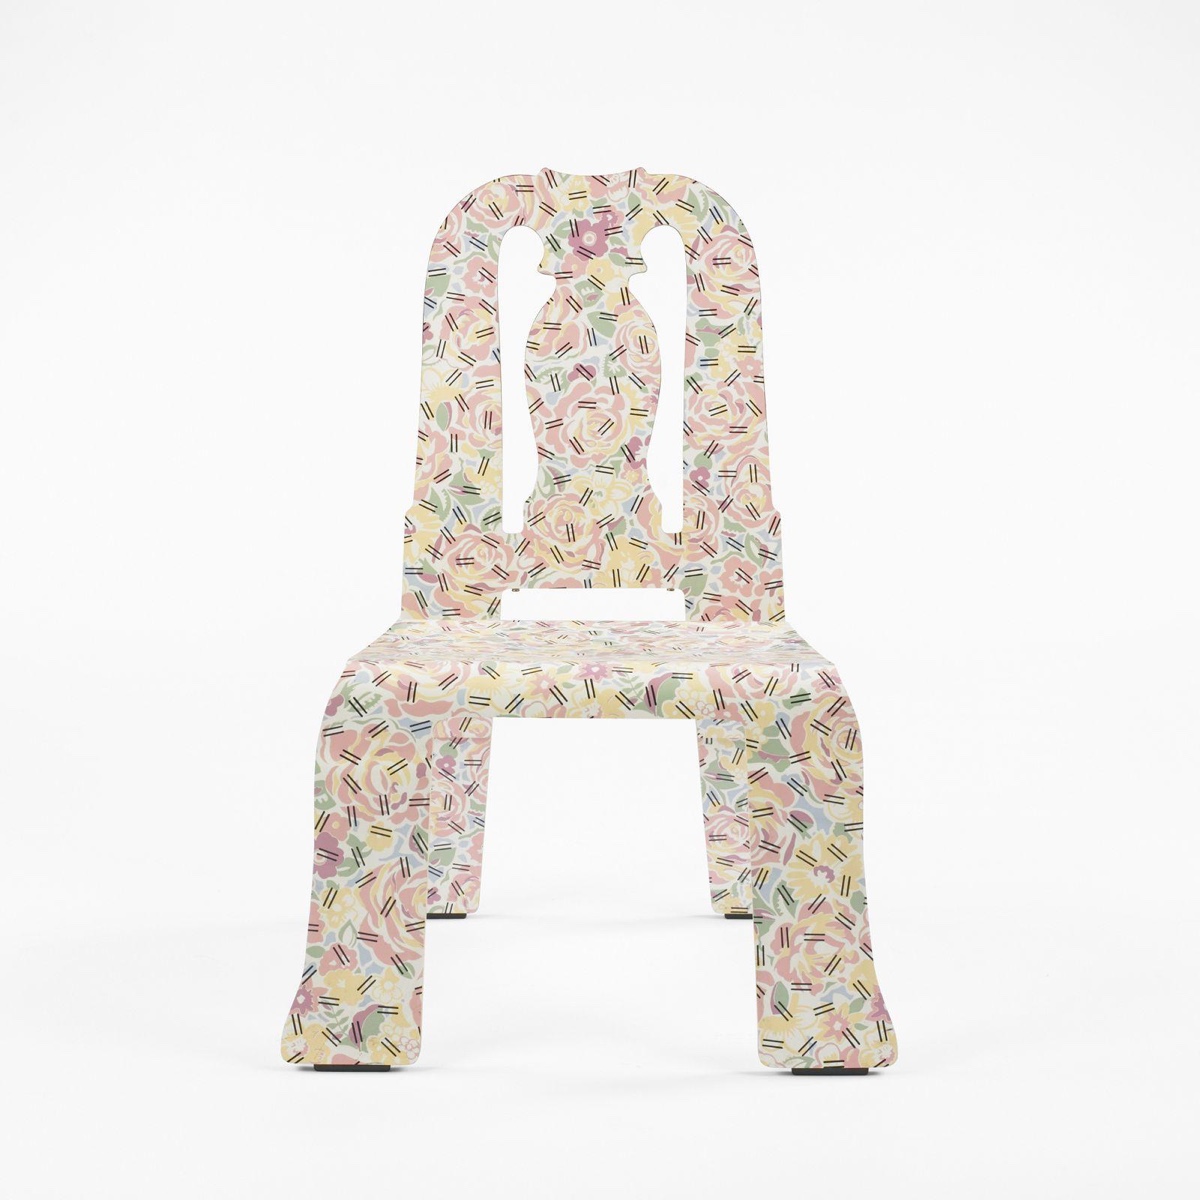 The Memphis-esque "Grandmother" pattern applied to the chair was designed by Denise Scott Brown. Image © iCollector.com.